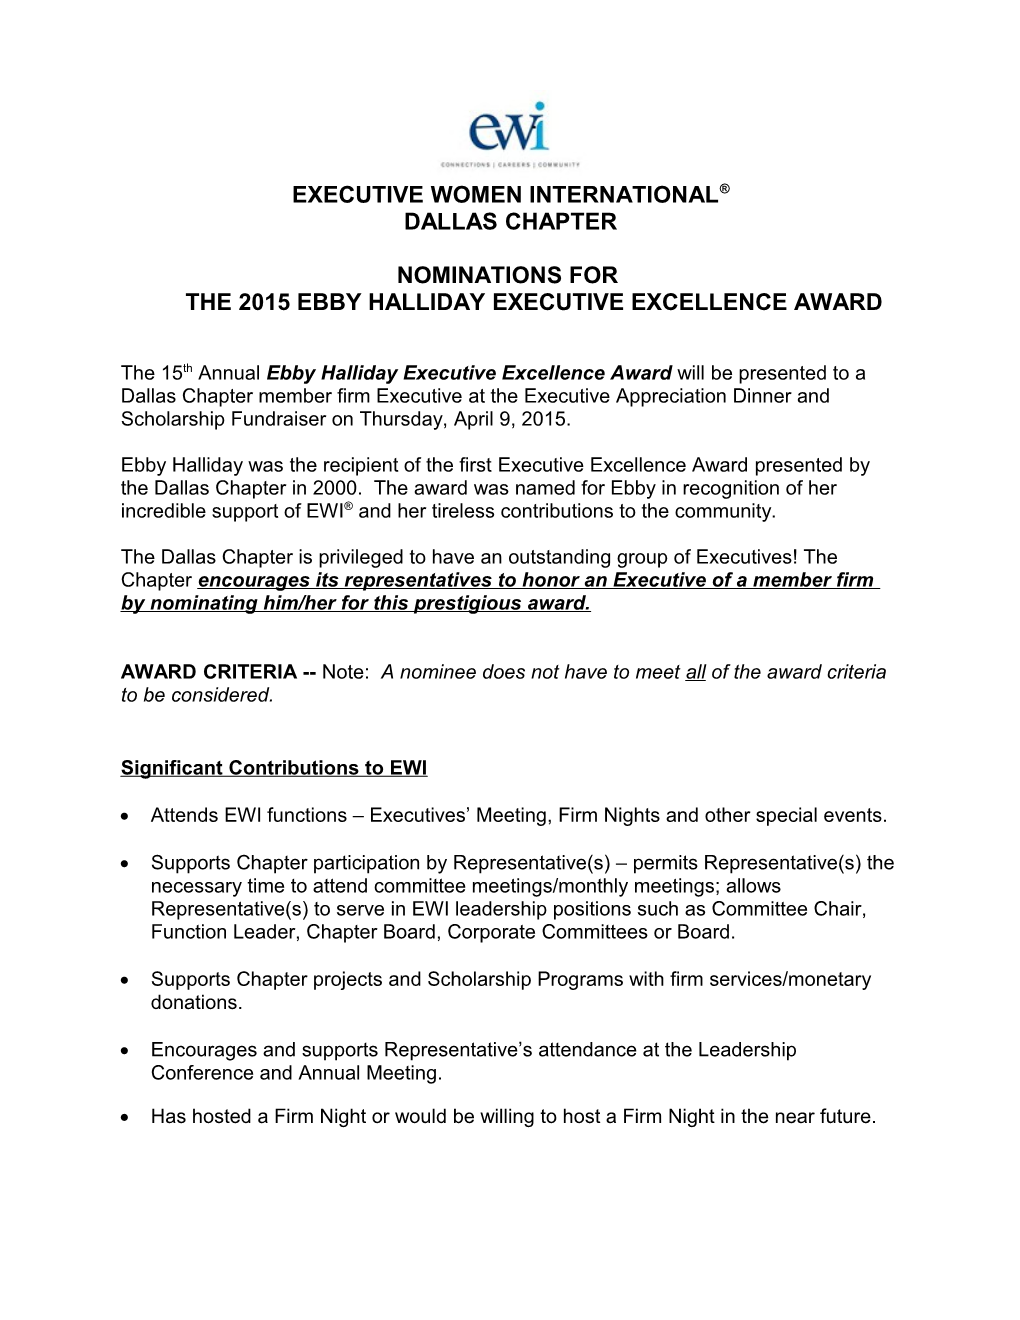 Nominations for the 2015Ebby Halliday Executive Excellence Award